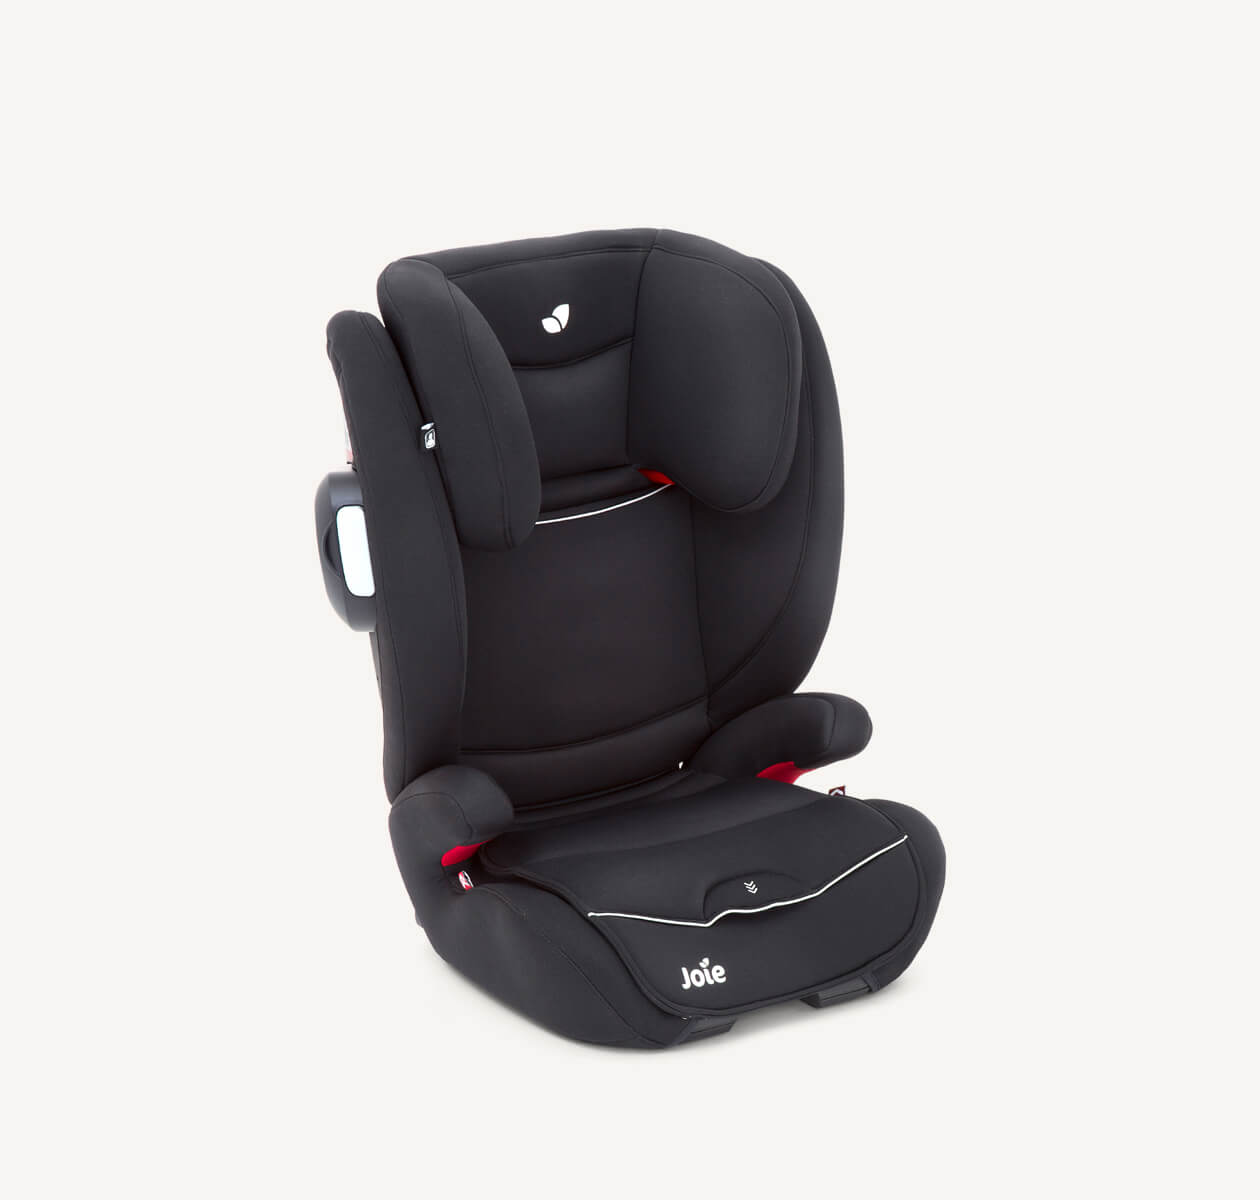  Joie Duallo booster car seat in black at an angle.